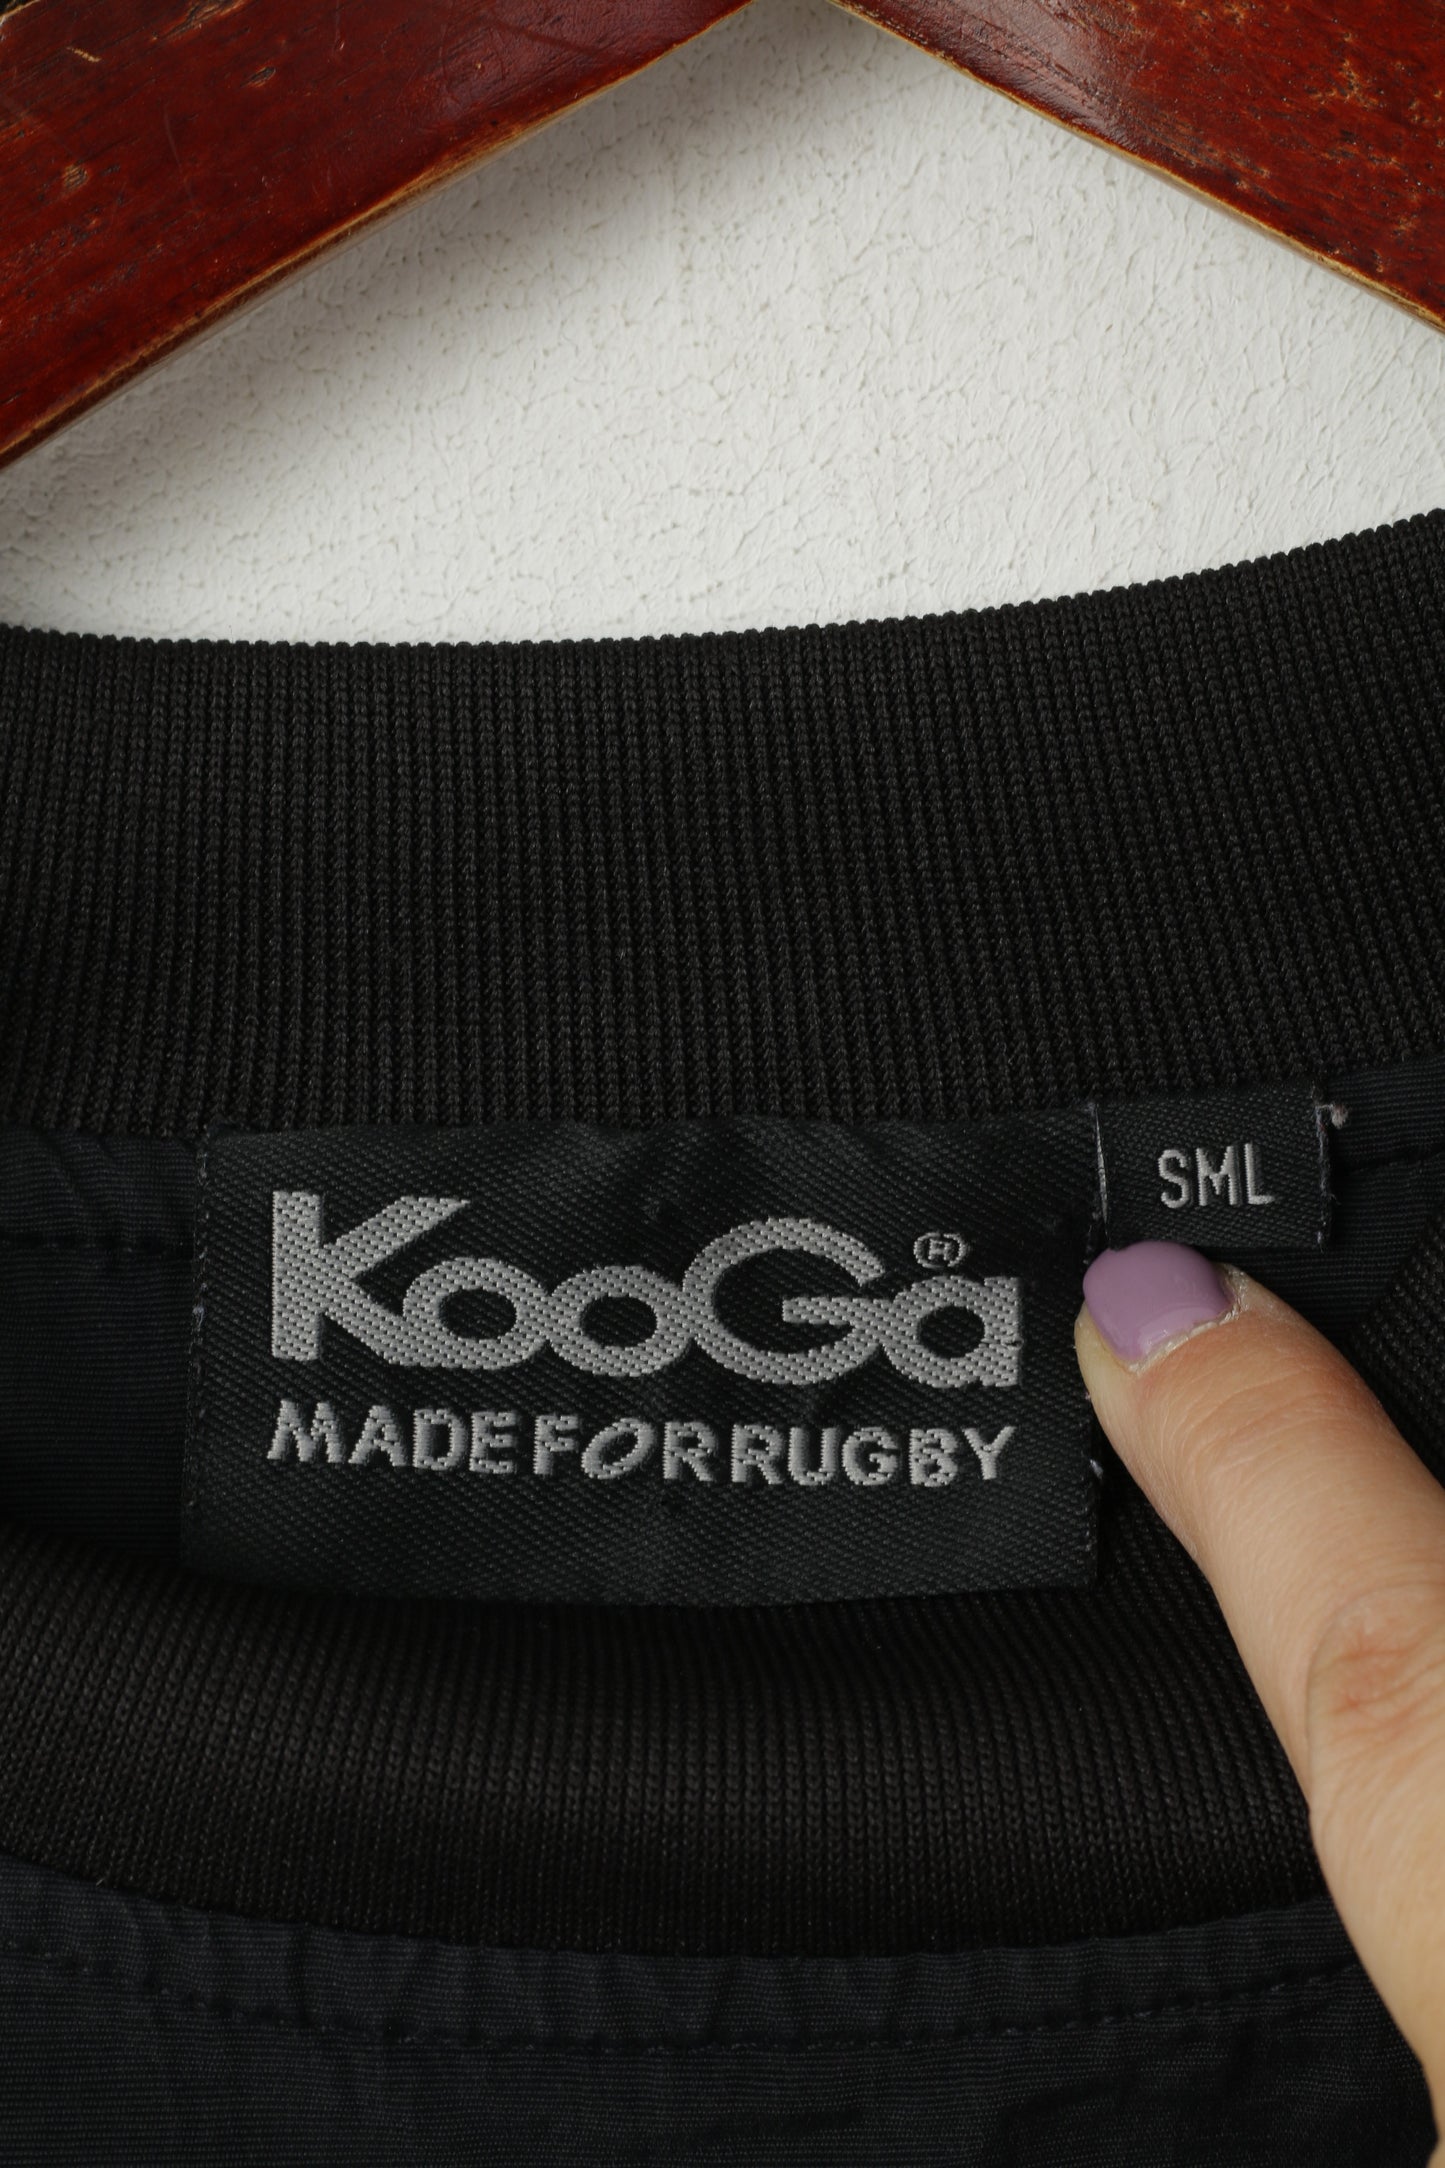 Kooga Men SML One Size Jacket Black Traning Pullover Rugby Nylon Top